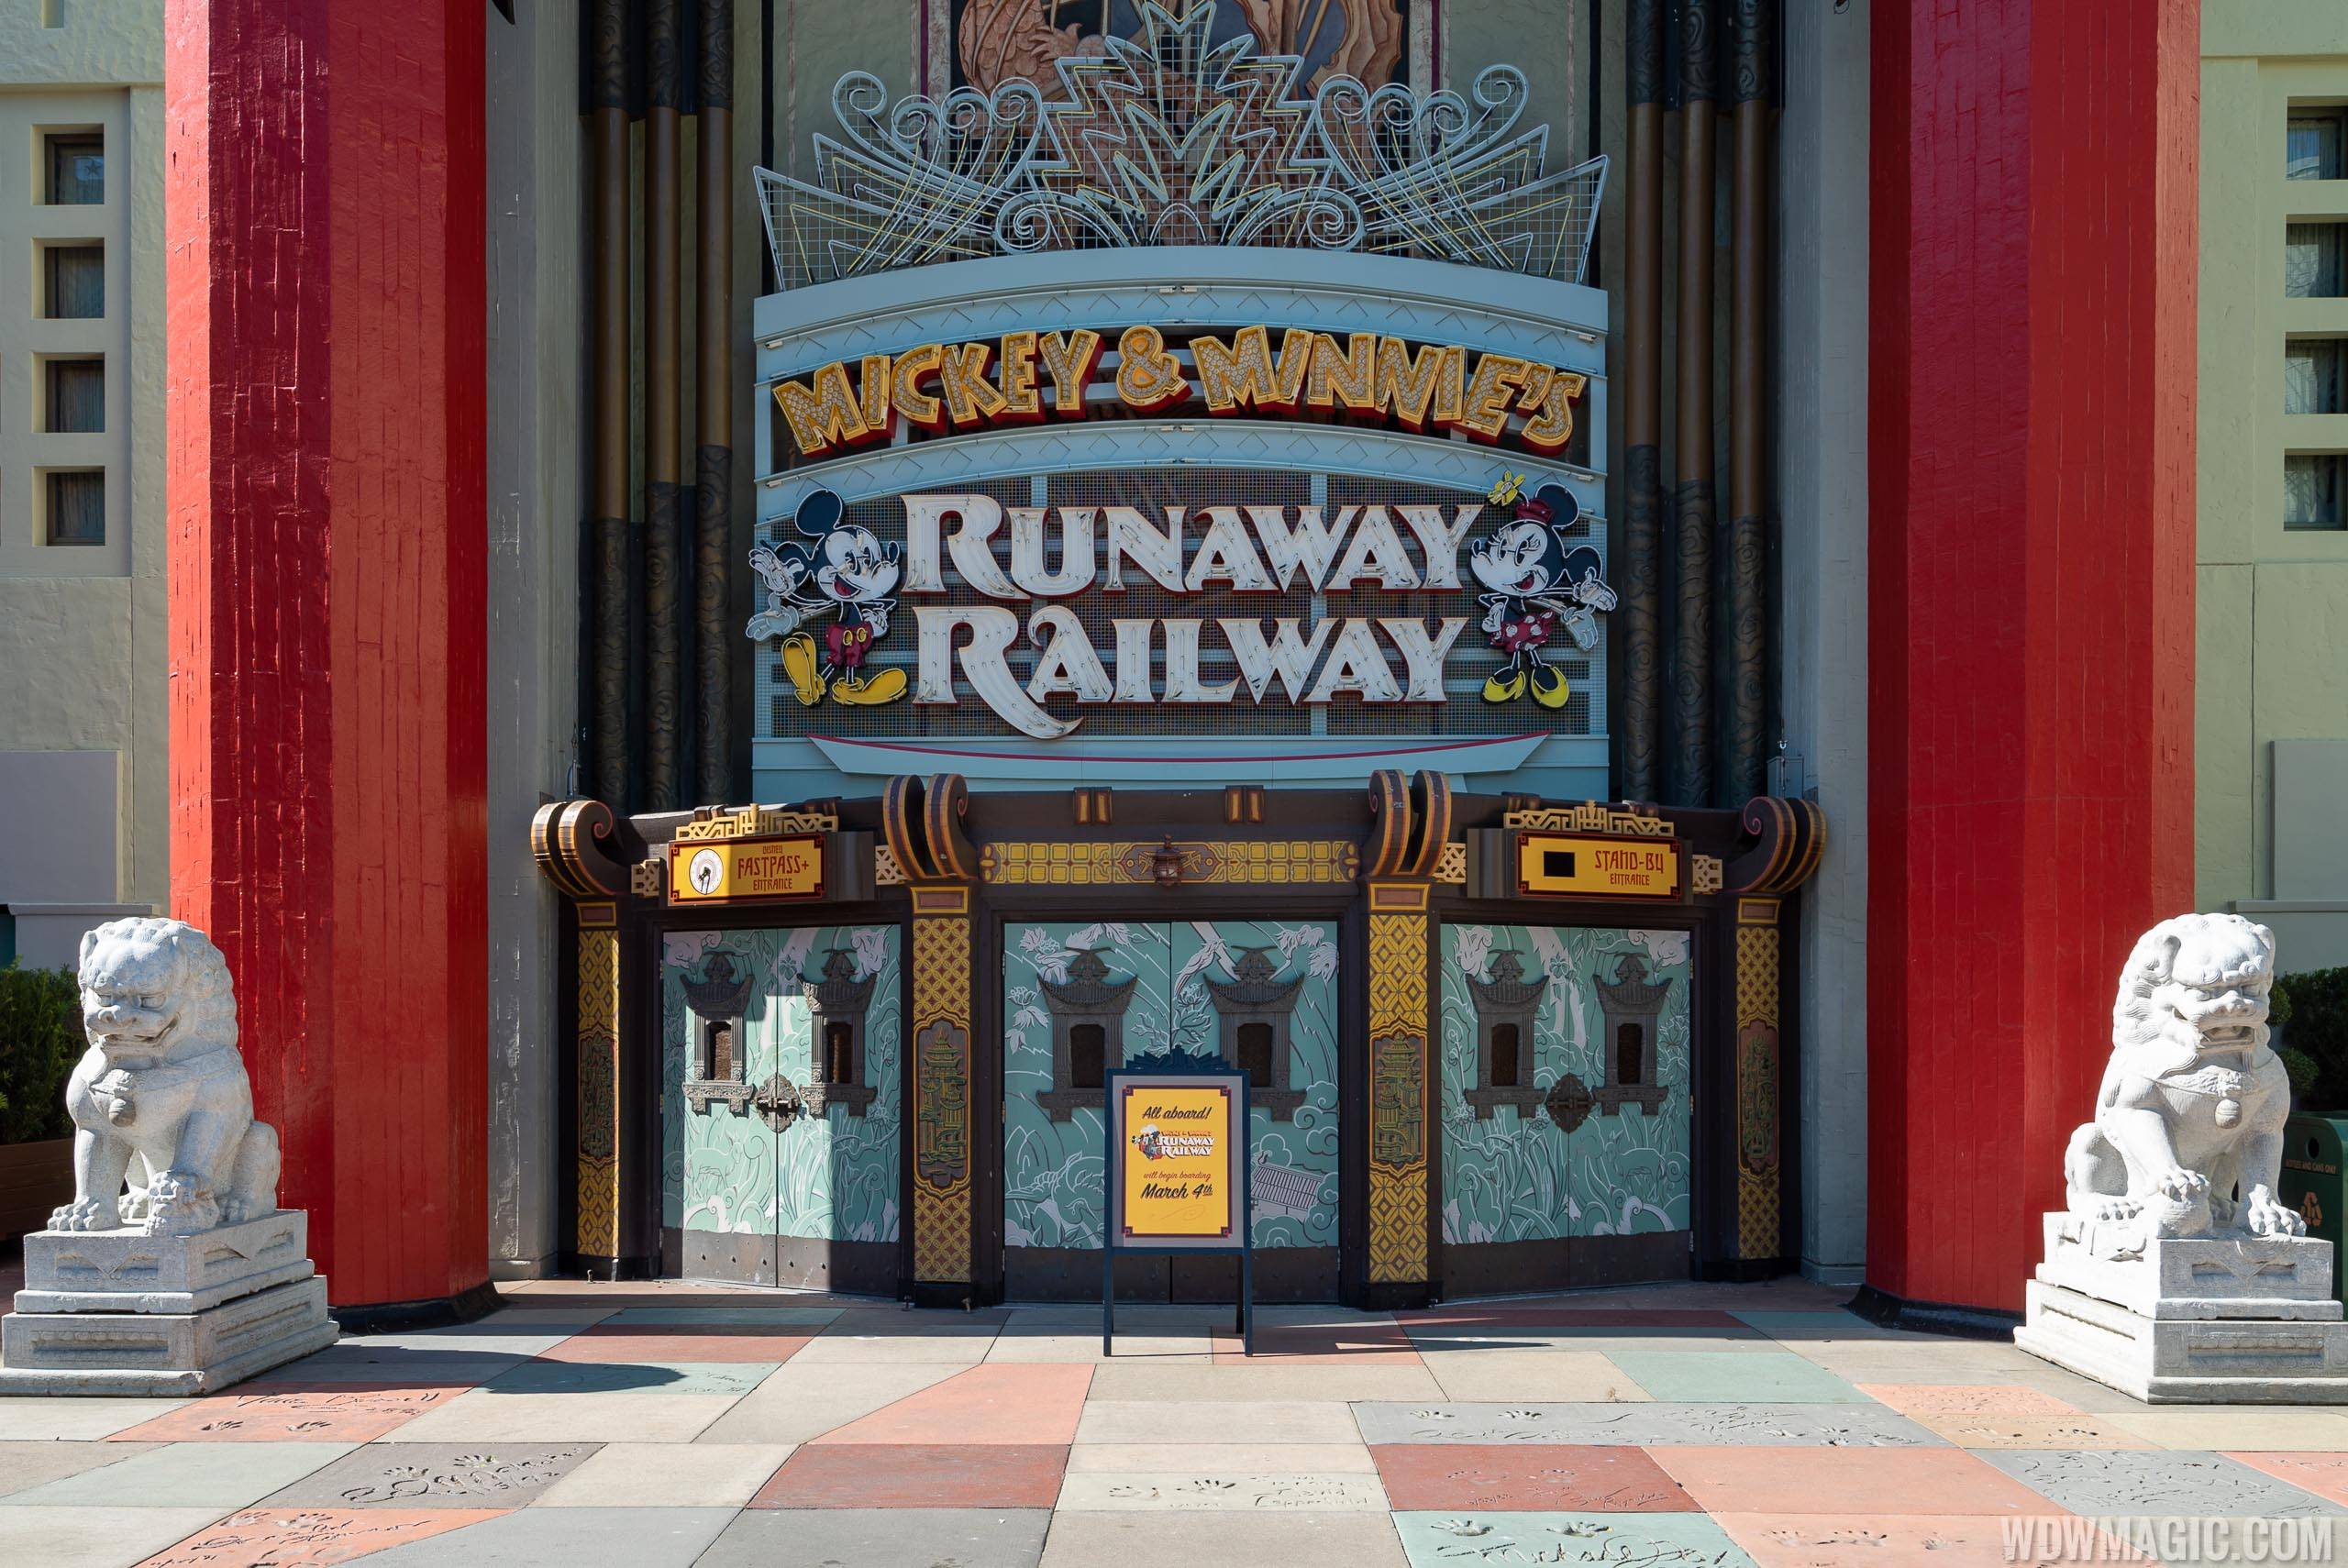 Mickey and Minnie's Runaway Railway FastPass and Standby signs